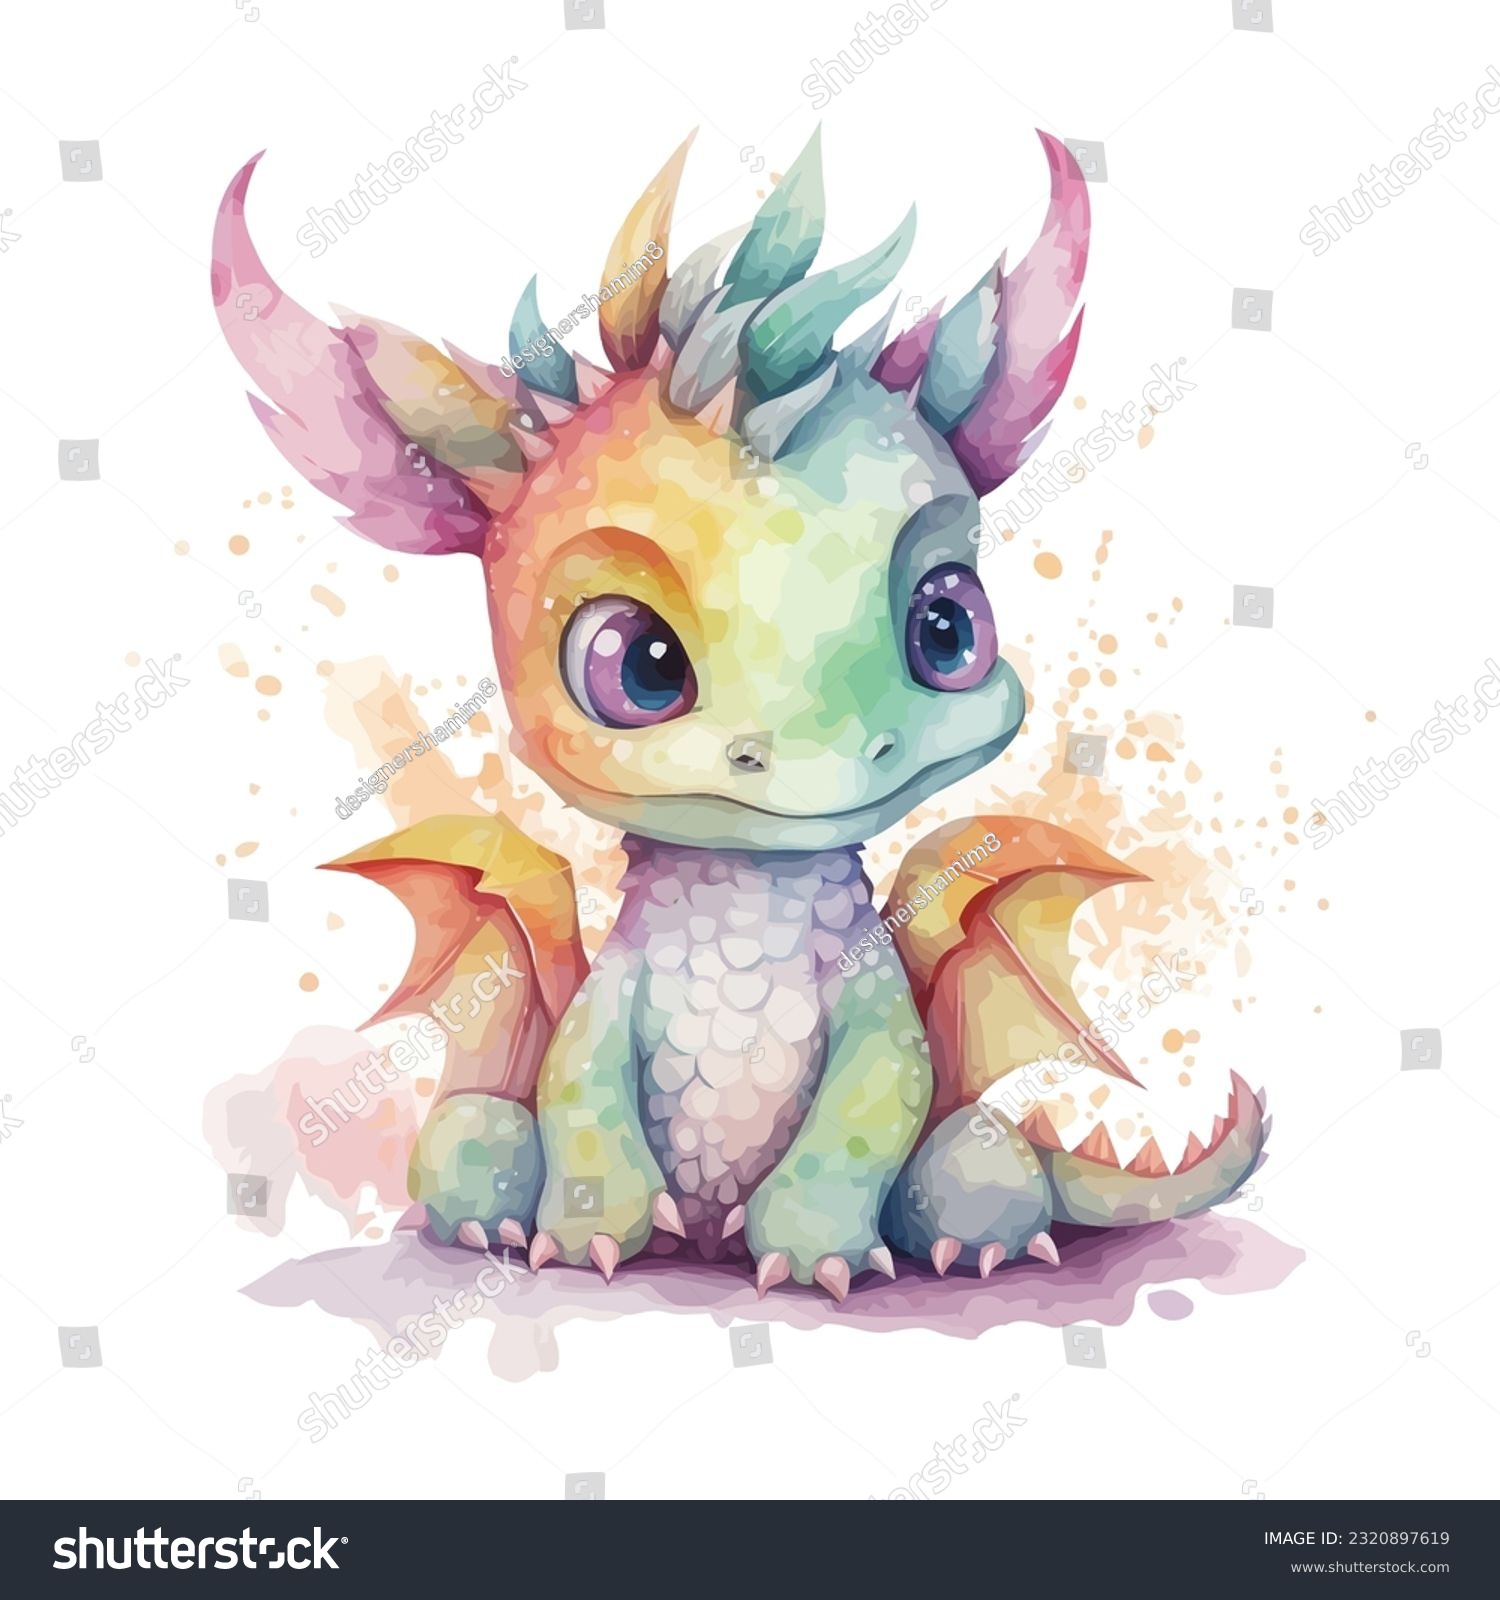 SVG of A baby dragon blowing bubbles watercolor svg